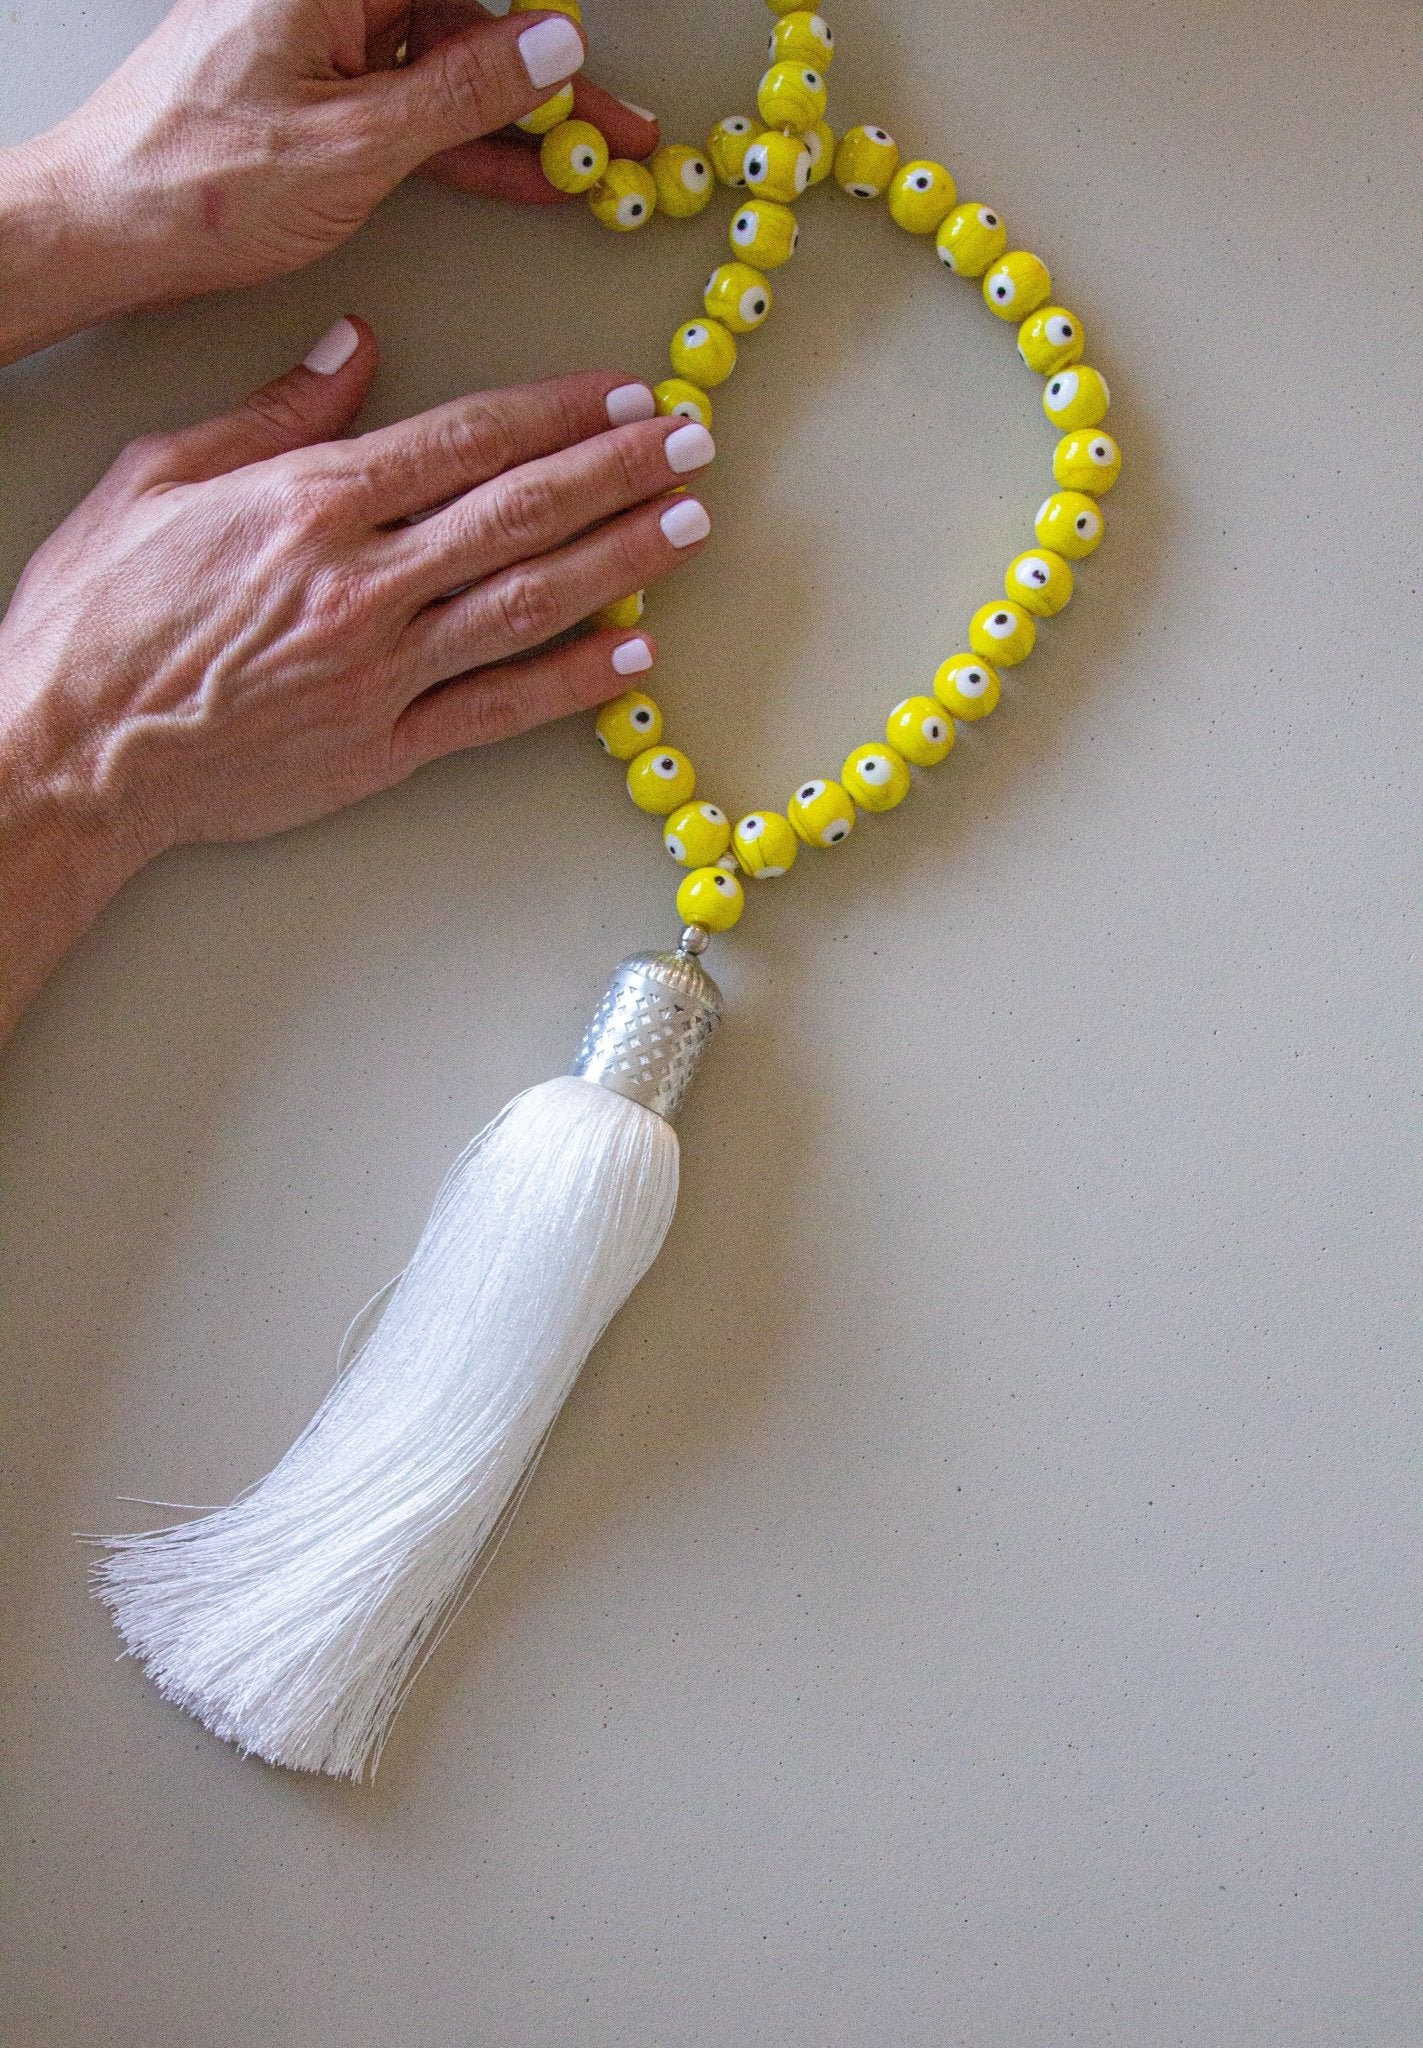 Evil eye glass beads home decor necklace with white silk tassel - Yellow - Stylish Luck Home Decor | Hamsa \ Hand Of Fatima | Good Luck Gifts